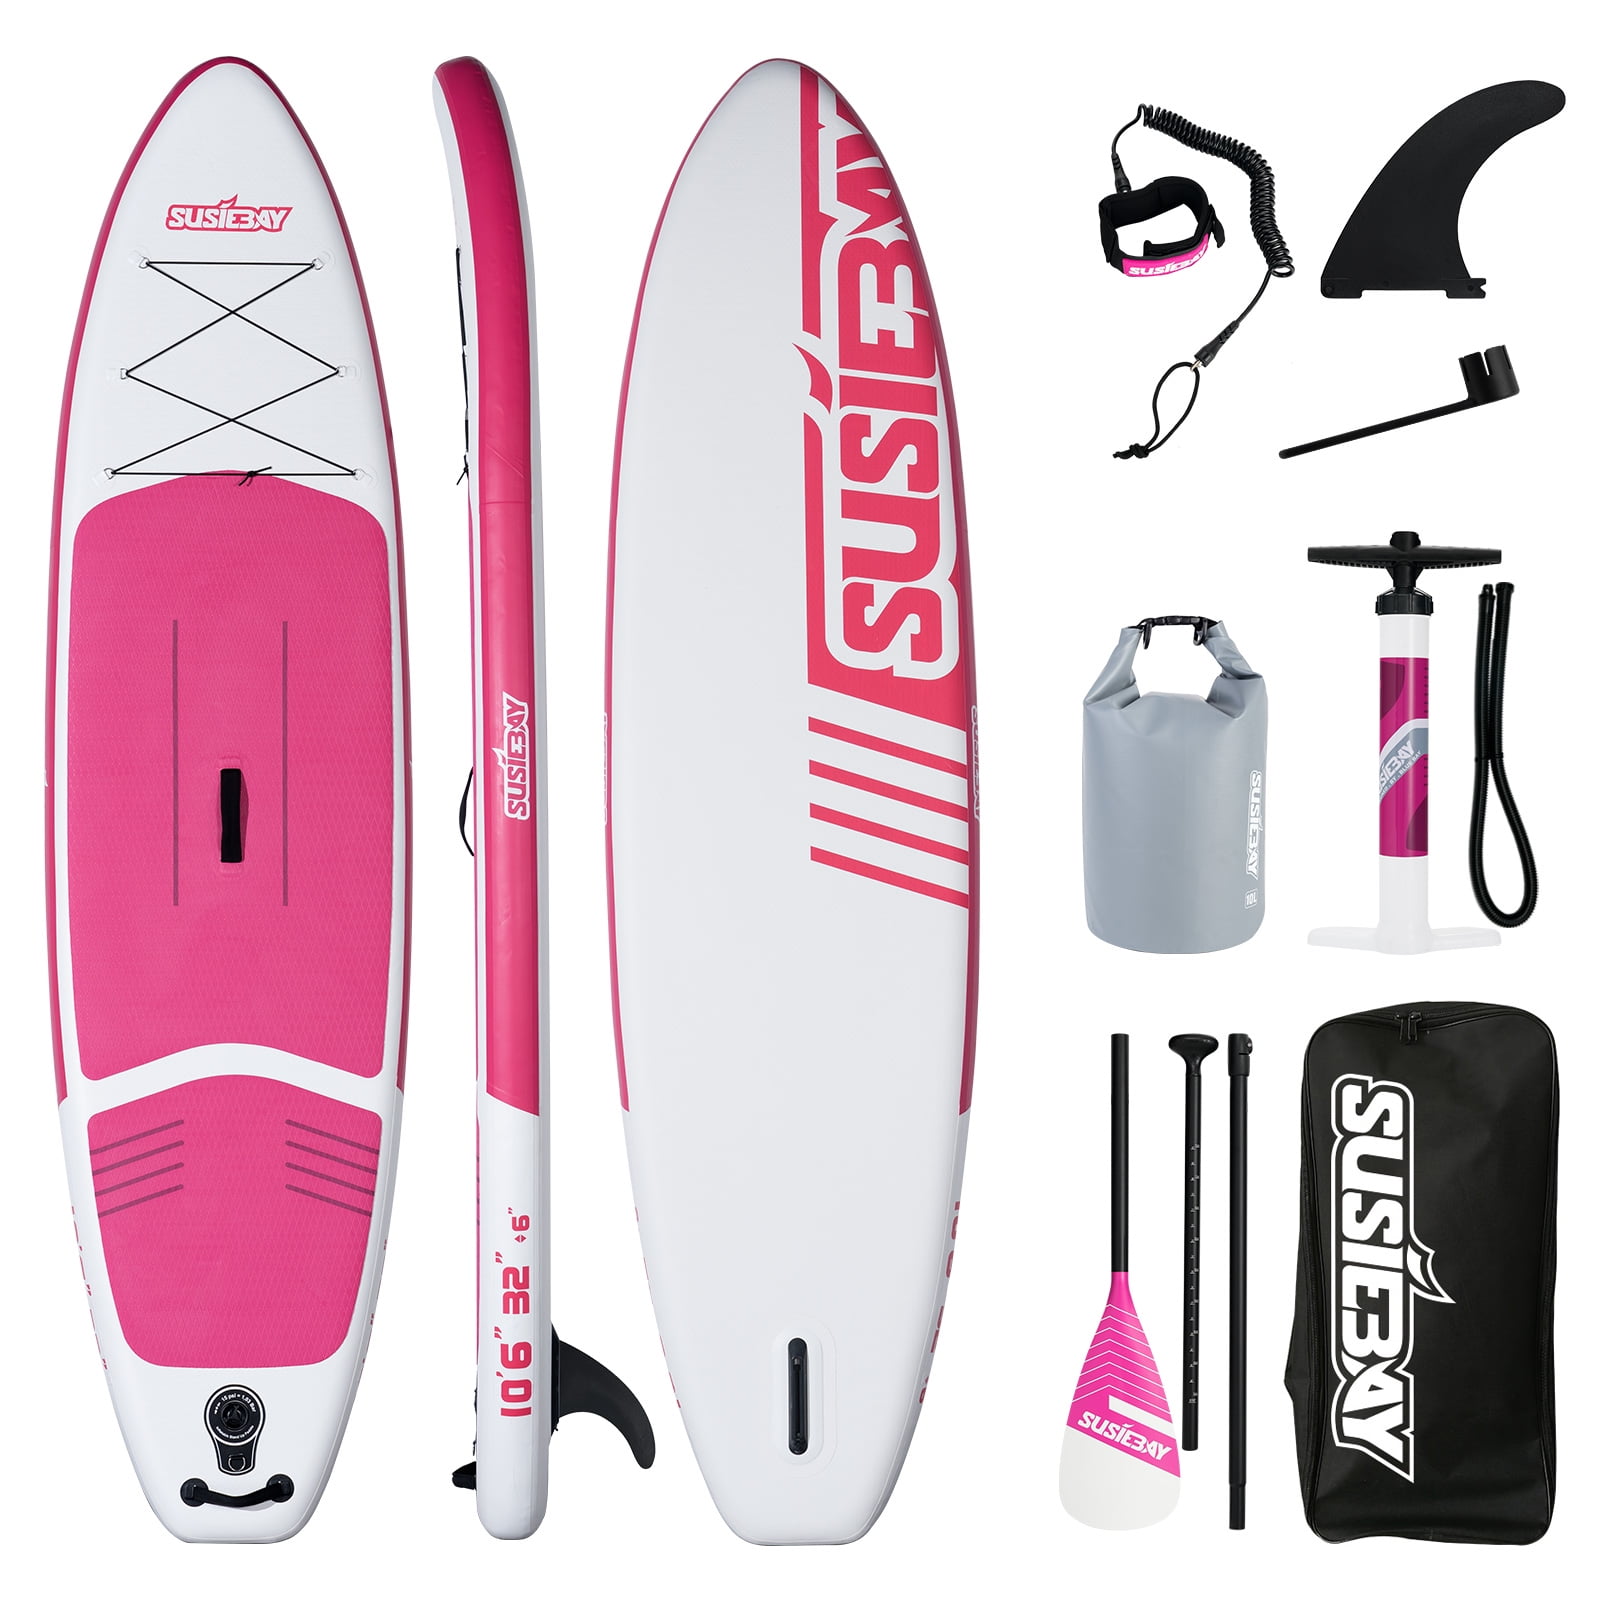 SUSIEBAY Inflatable Stand Up Paddle Board, Inflatable Paddleboard ...